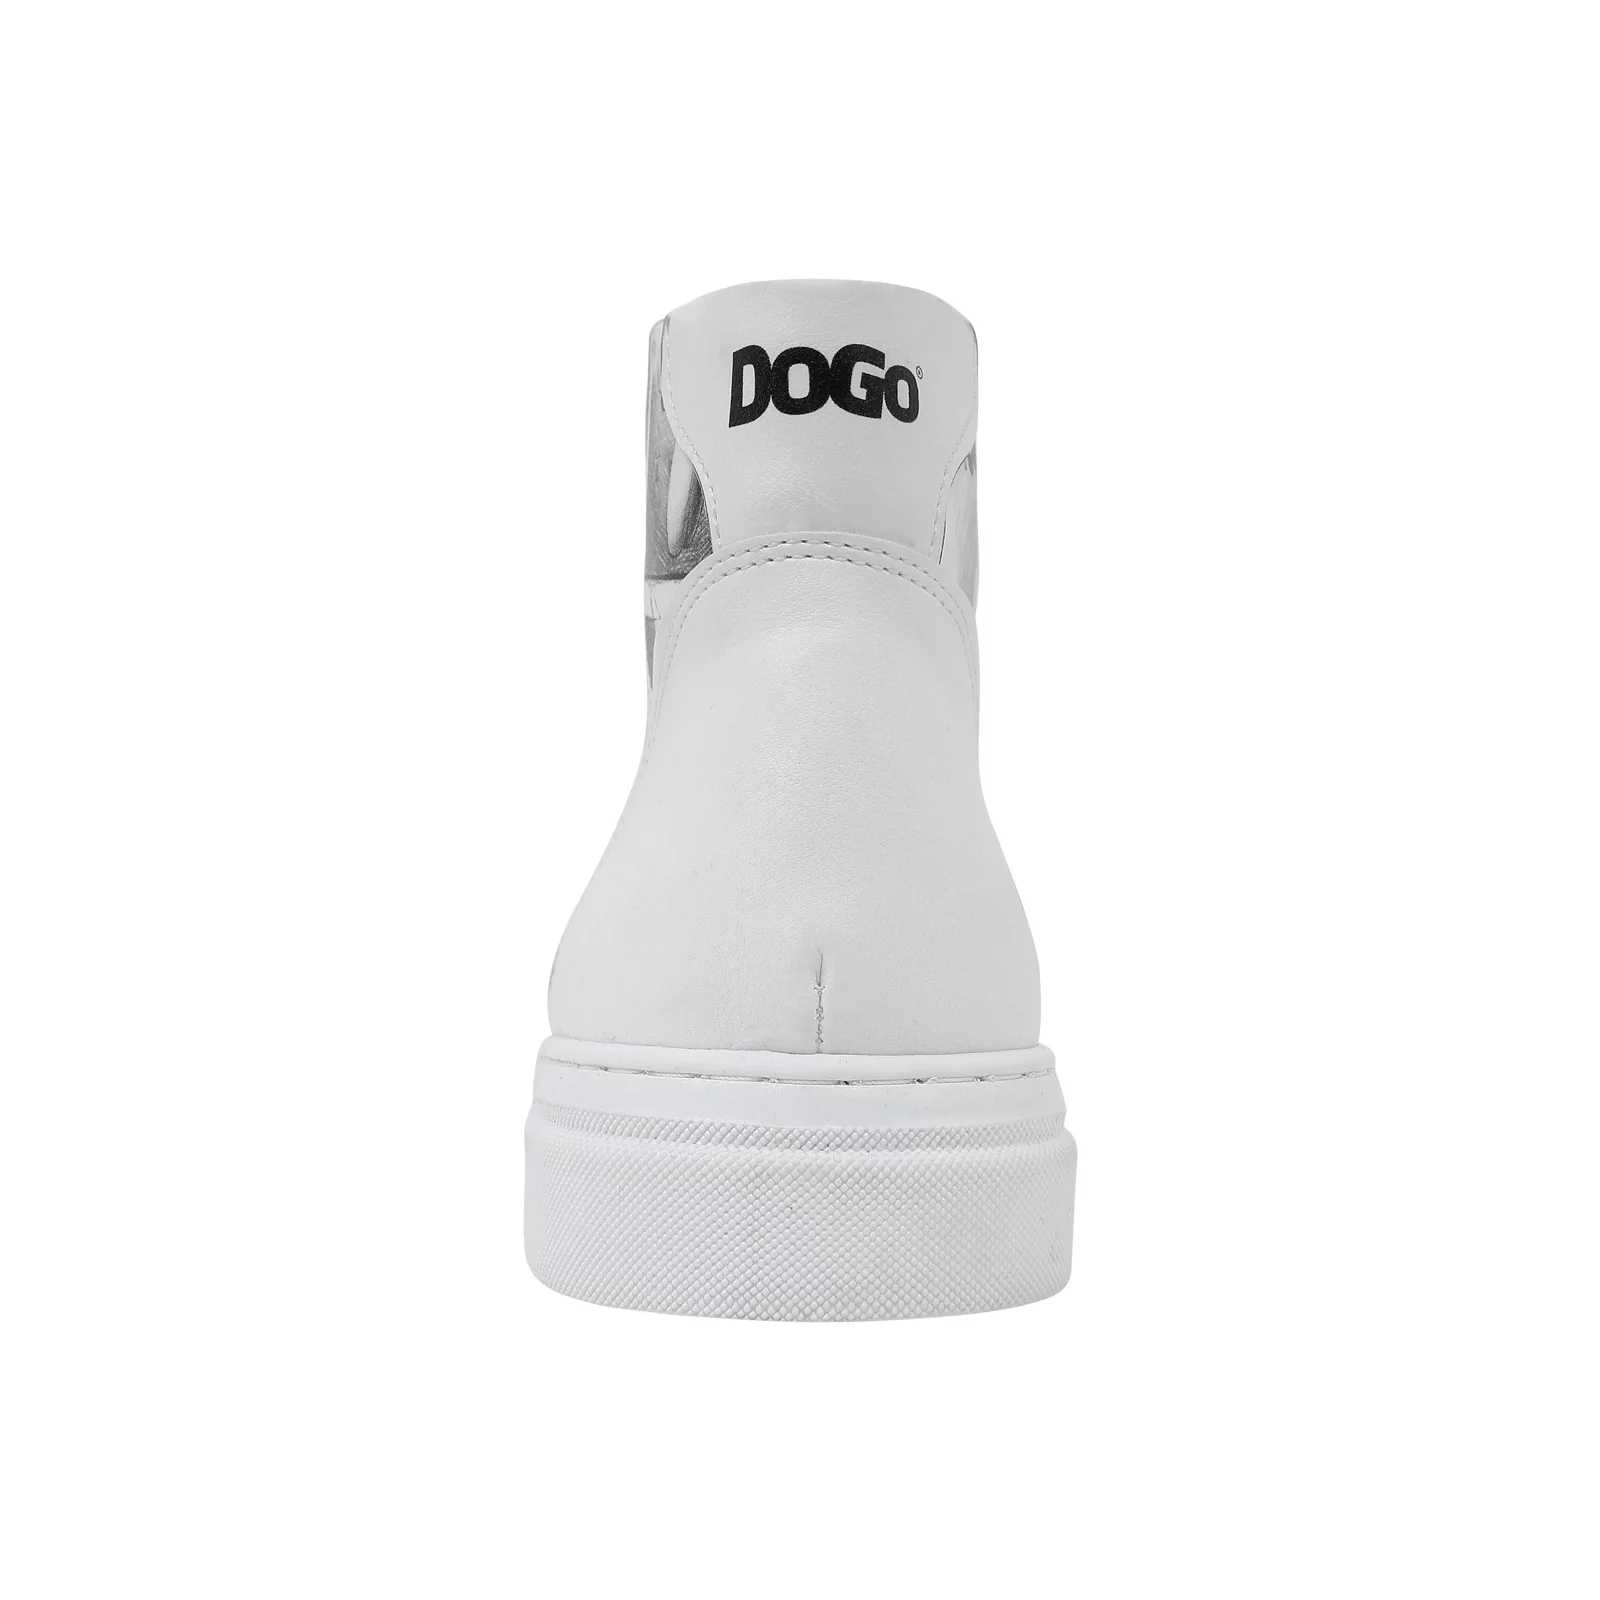 Dogo - Ace Boots - Tweety Sketch 19072-77